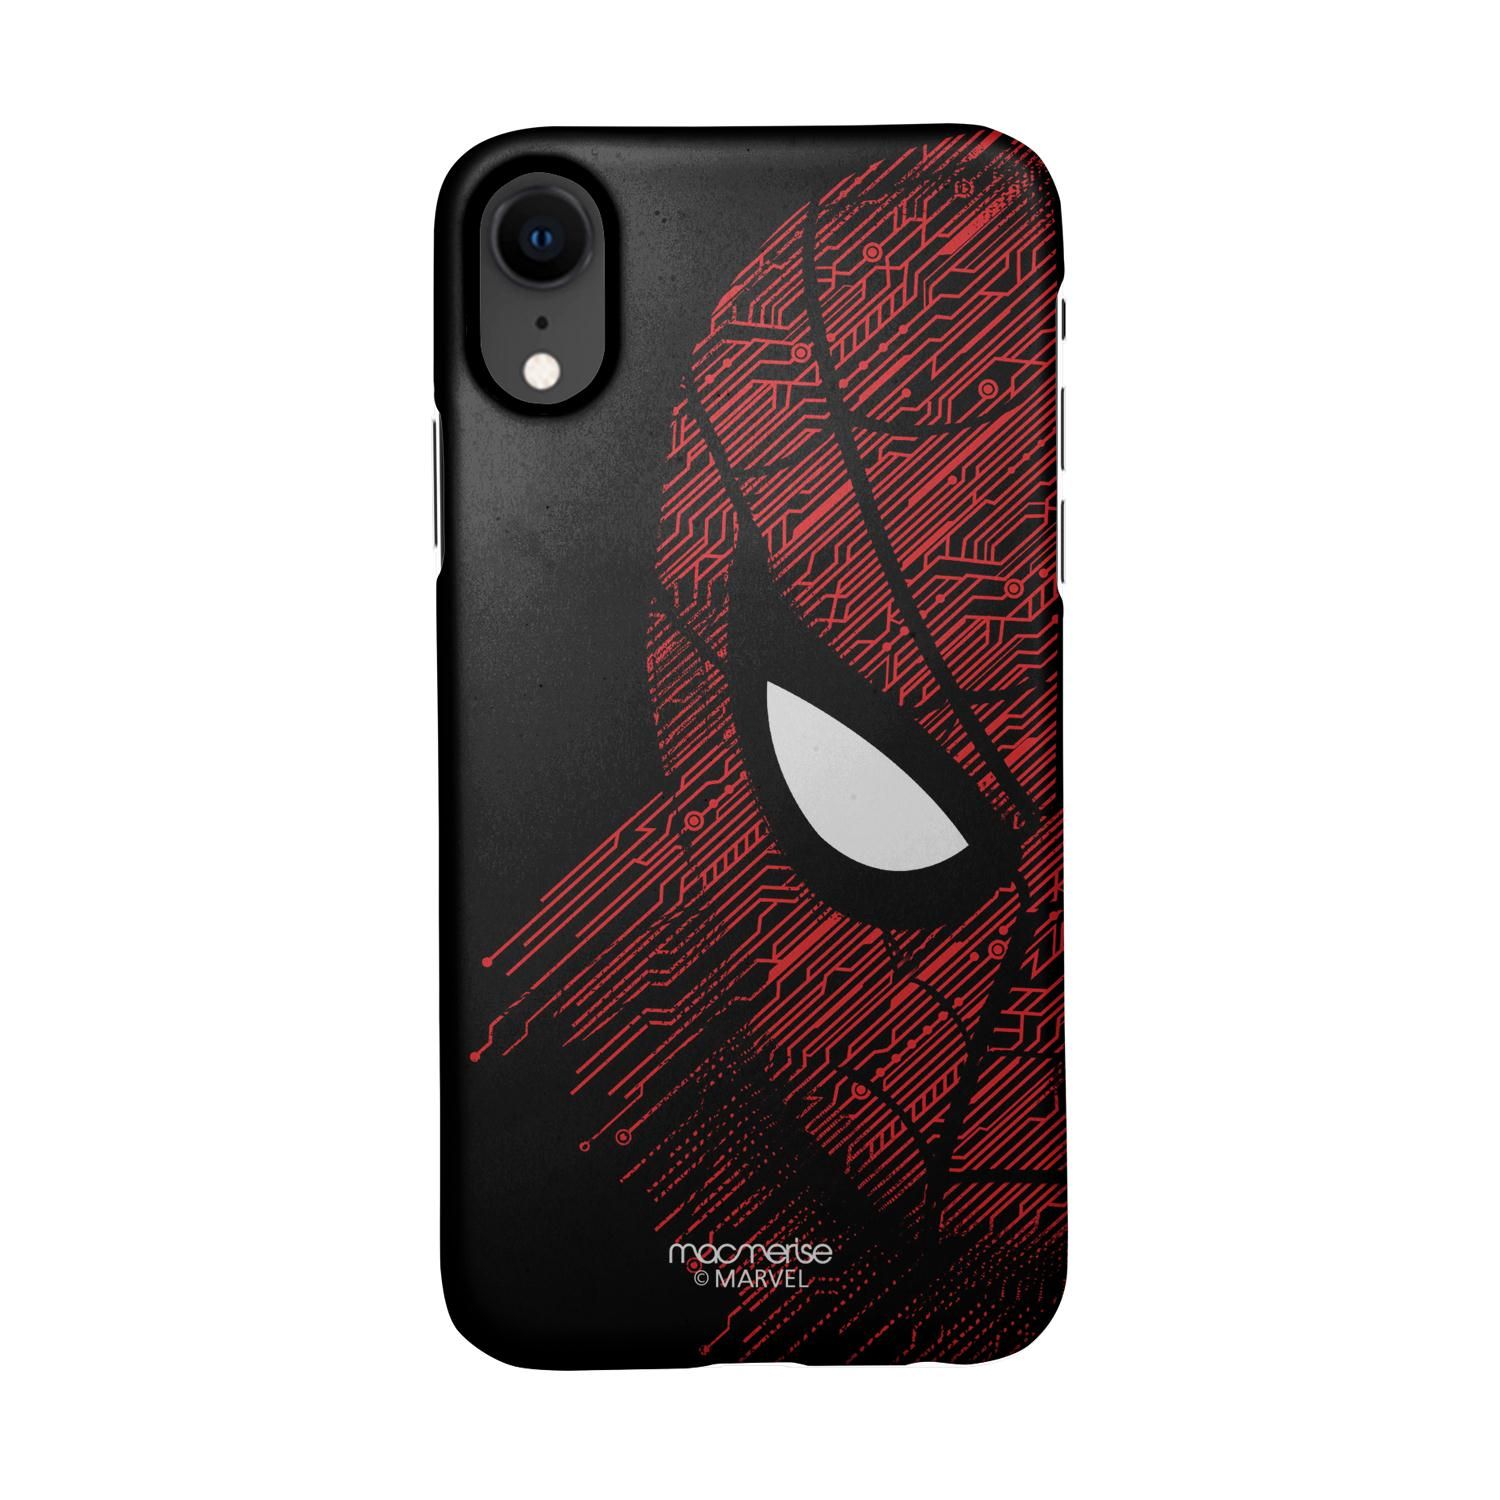 Buy Sketch Out Spiderman - Sleek Phone Case for iPhone XR Online